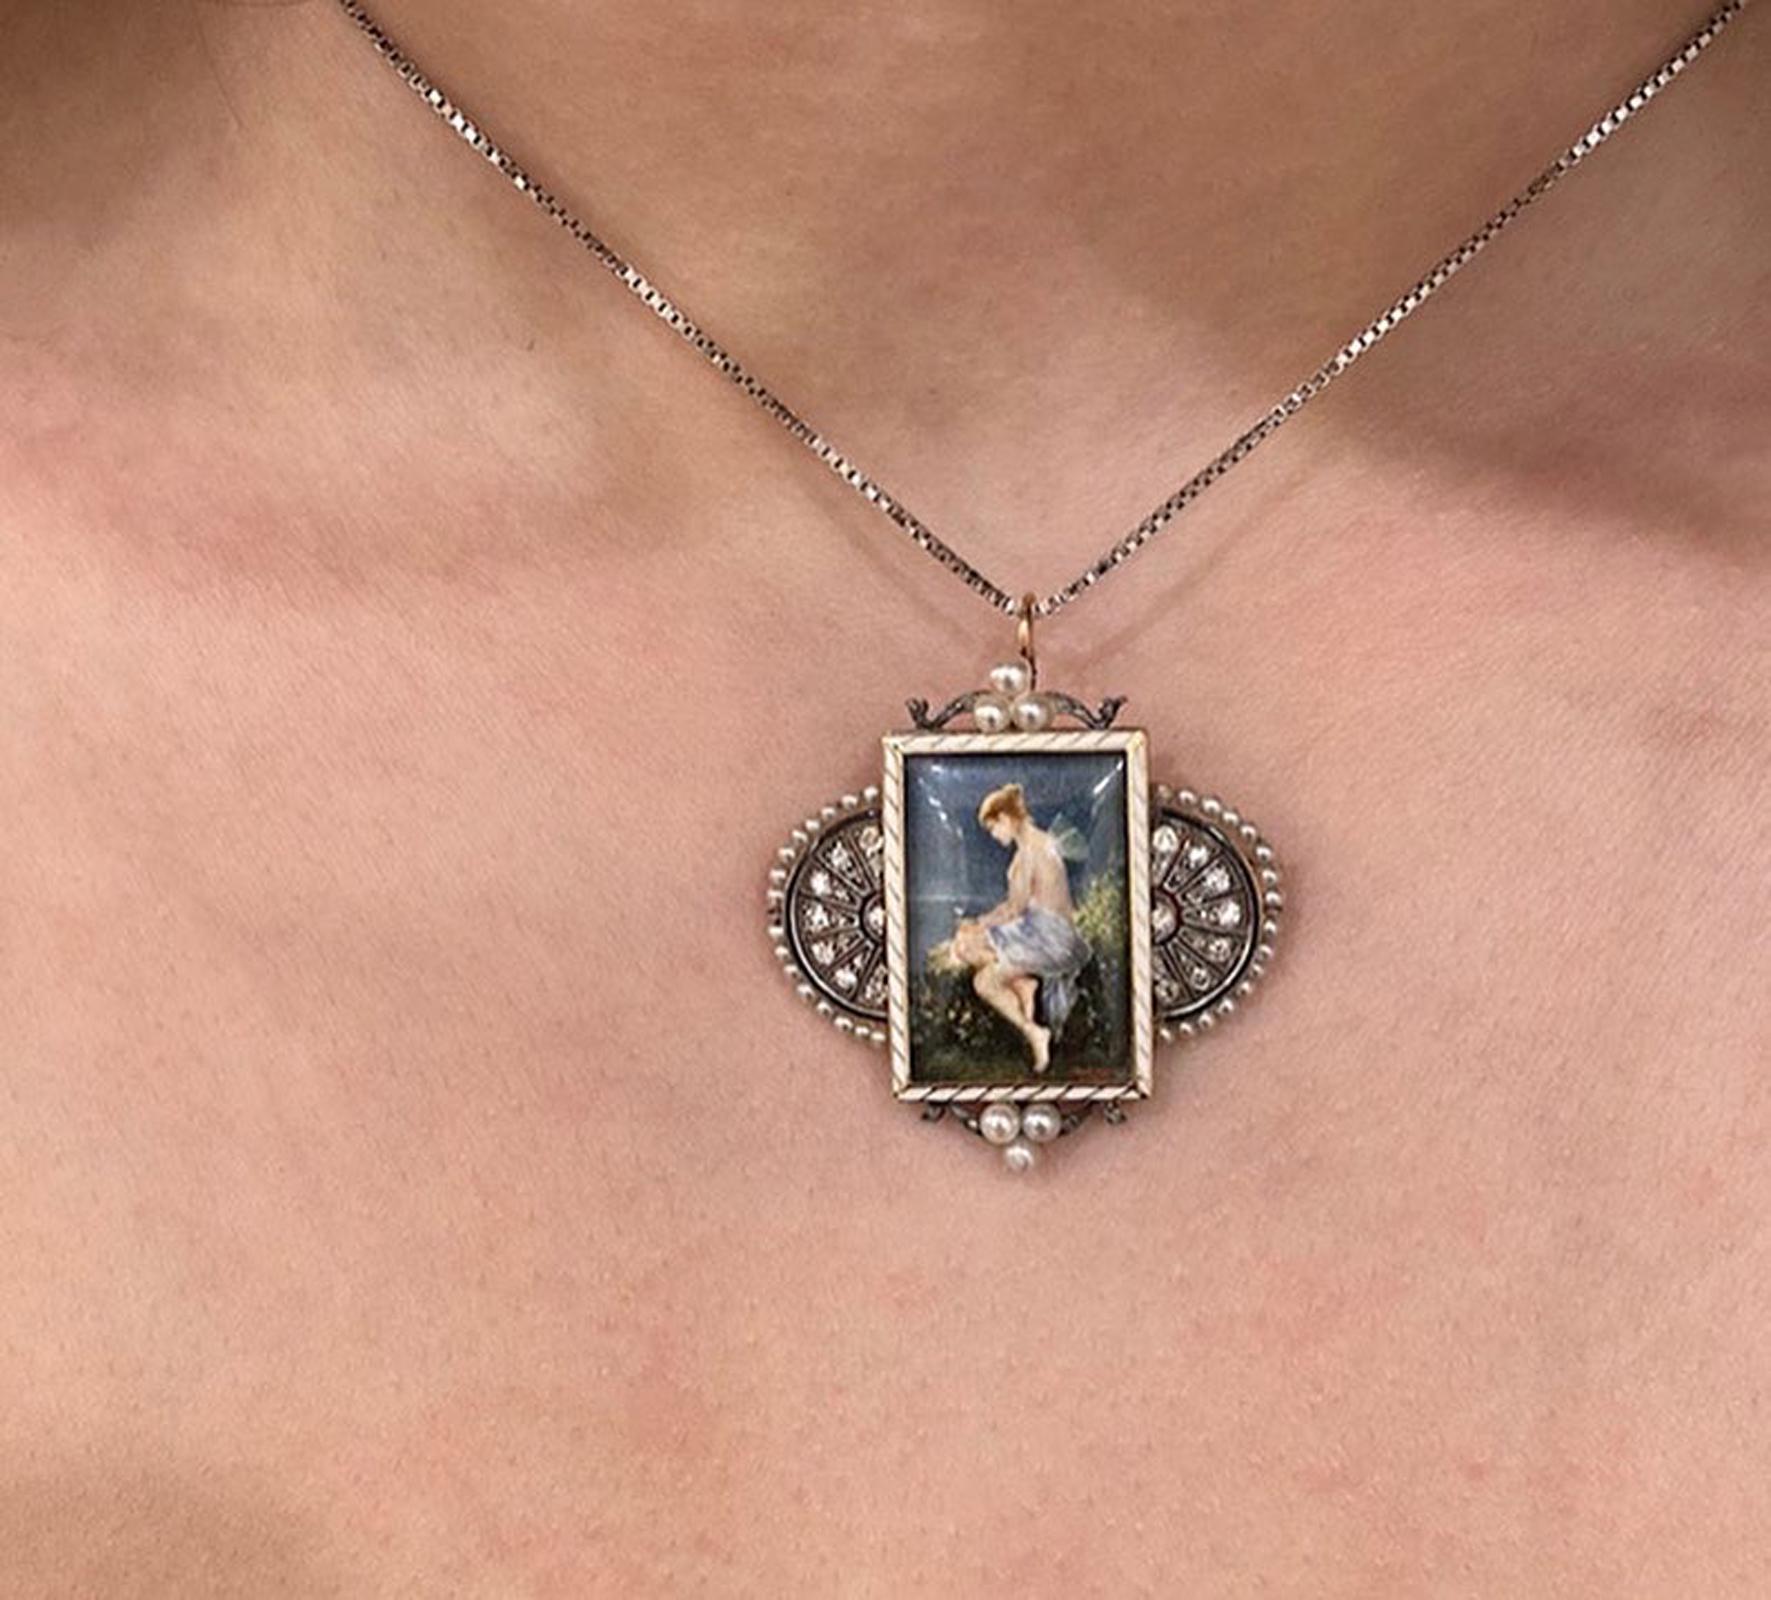 Austria, c. 1910

This delicate antique Jugendstil (Art Nouveau) pendant / brooch features a glazed miniature painting on bone after Wilhelm Kray’s Psyche with a Butterfly on the Seashore. The miniature is set in a white enamel, 14K gold, silver,